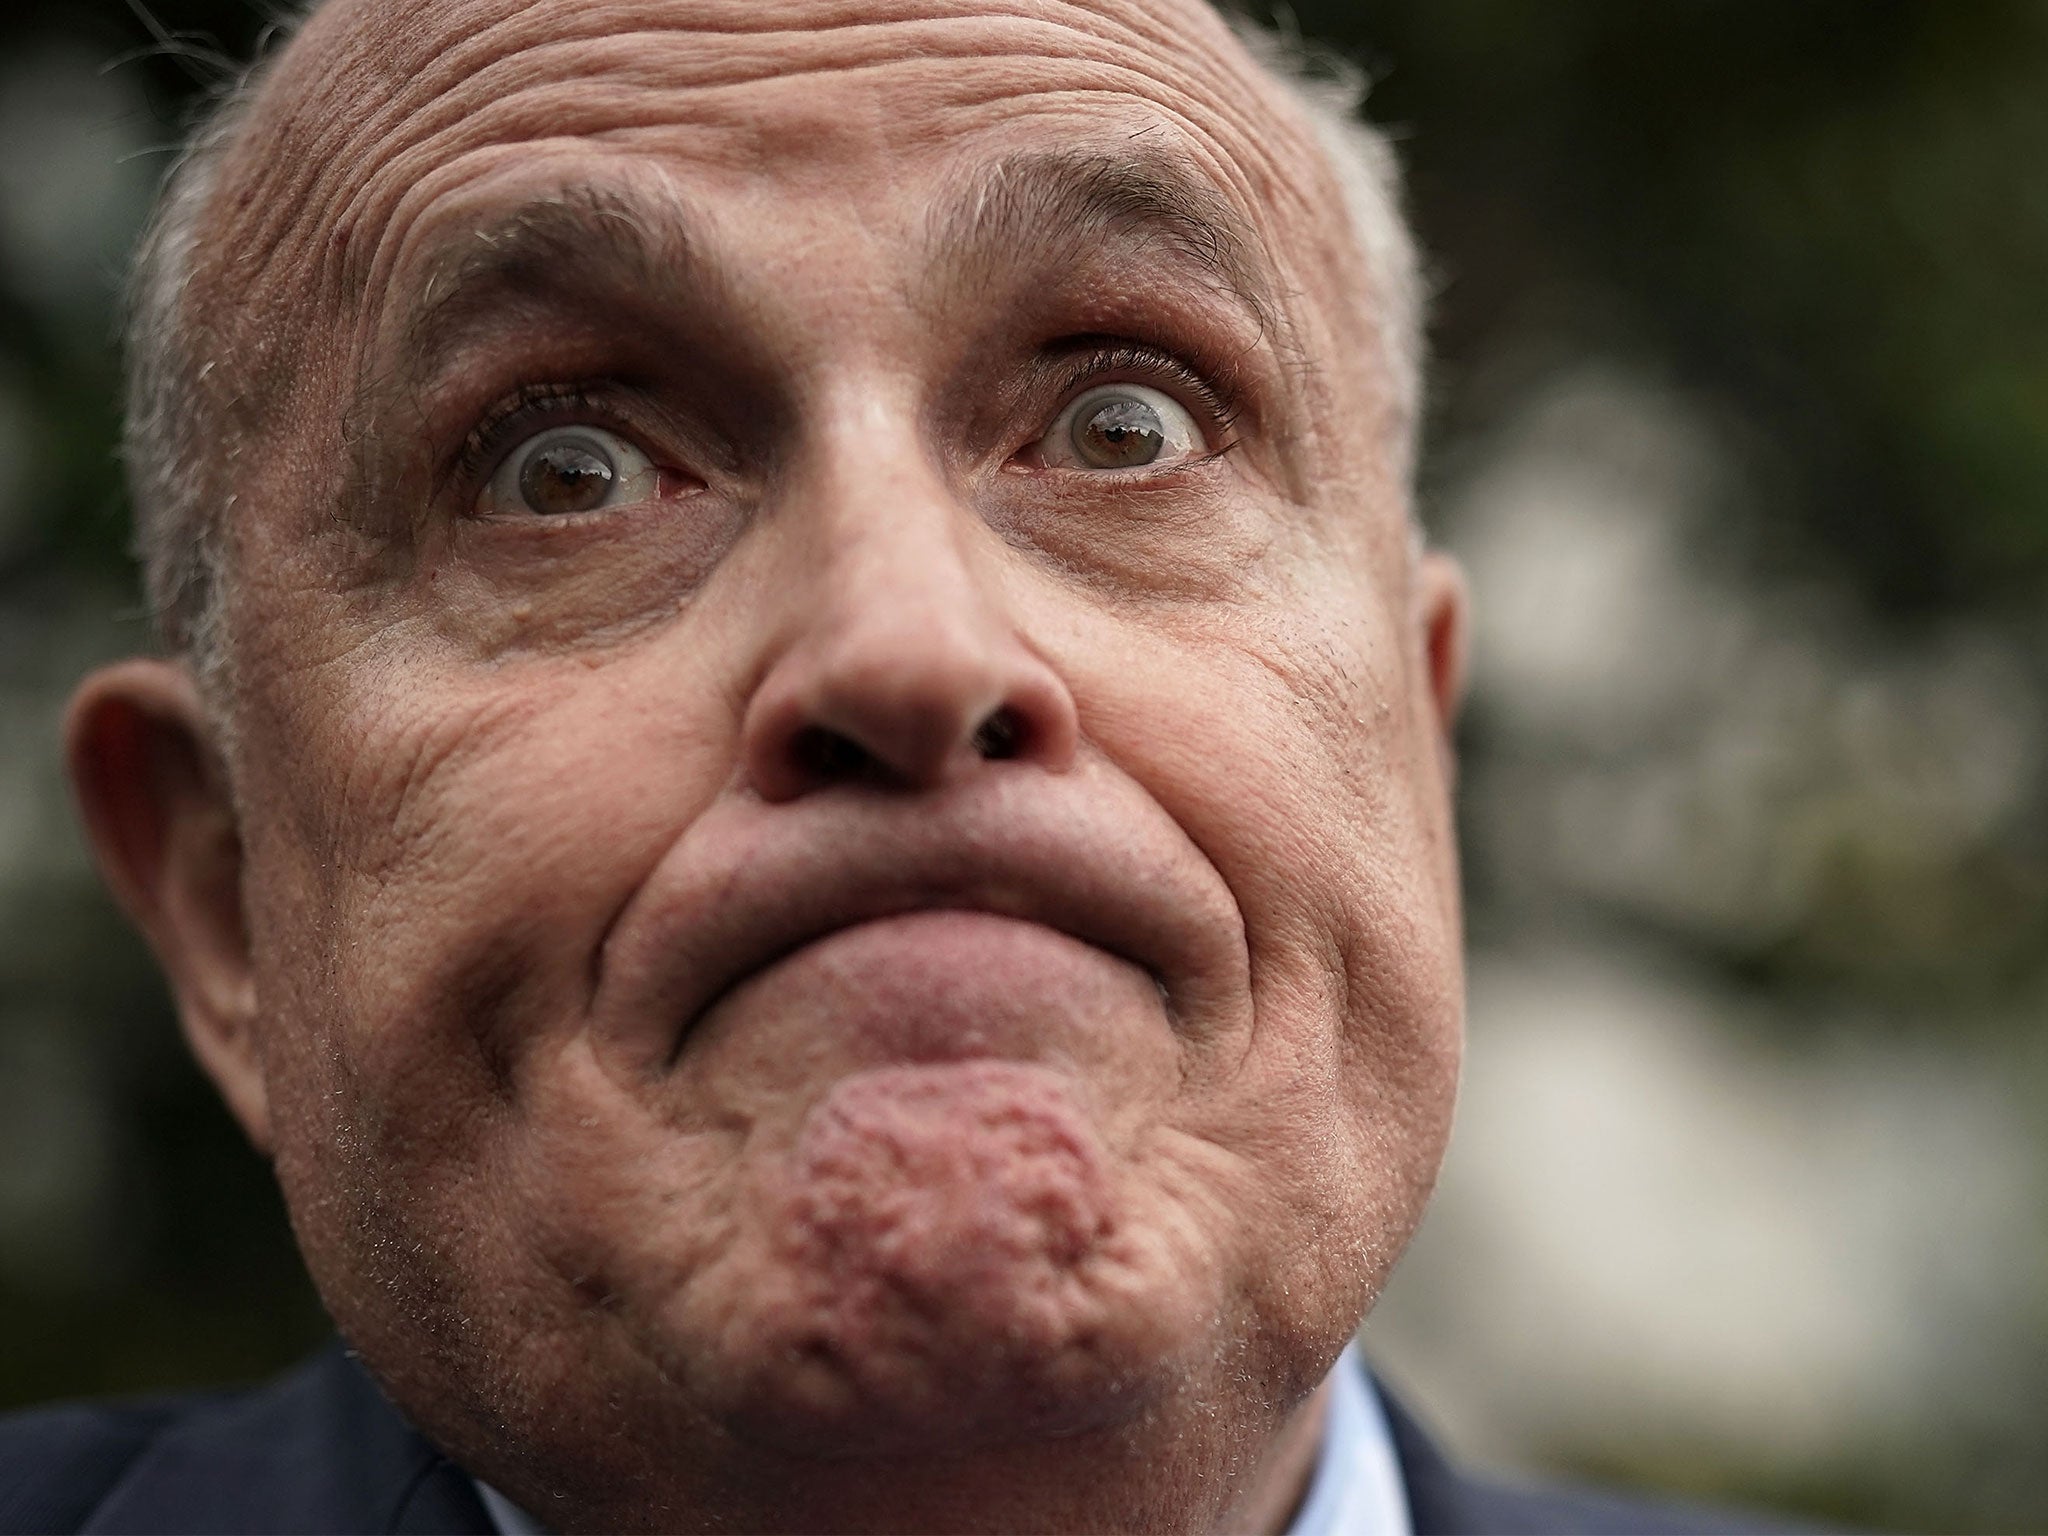 Trump’s lawyer Rudy Giuliani dramatically abandoned a trip to Ukraine on the weekend